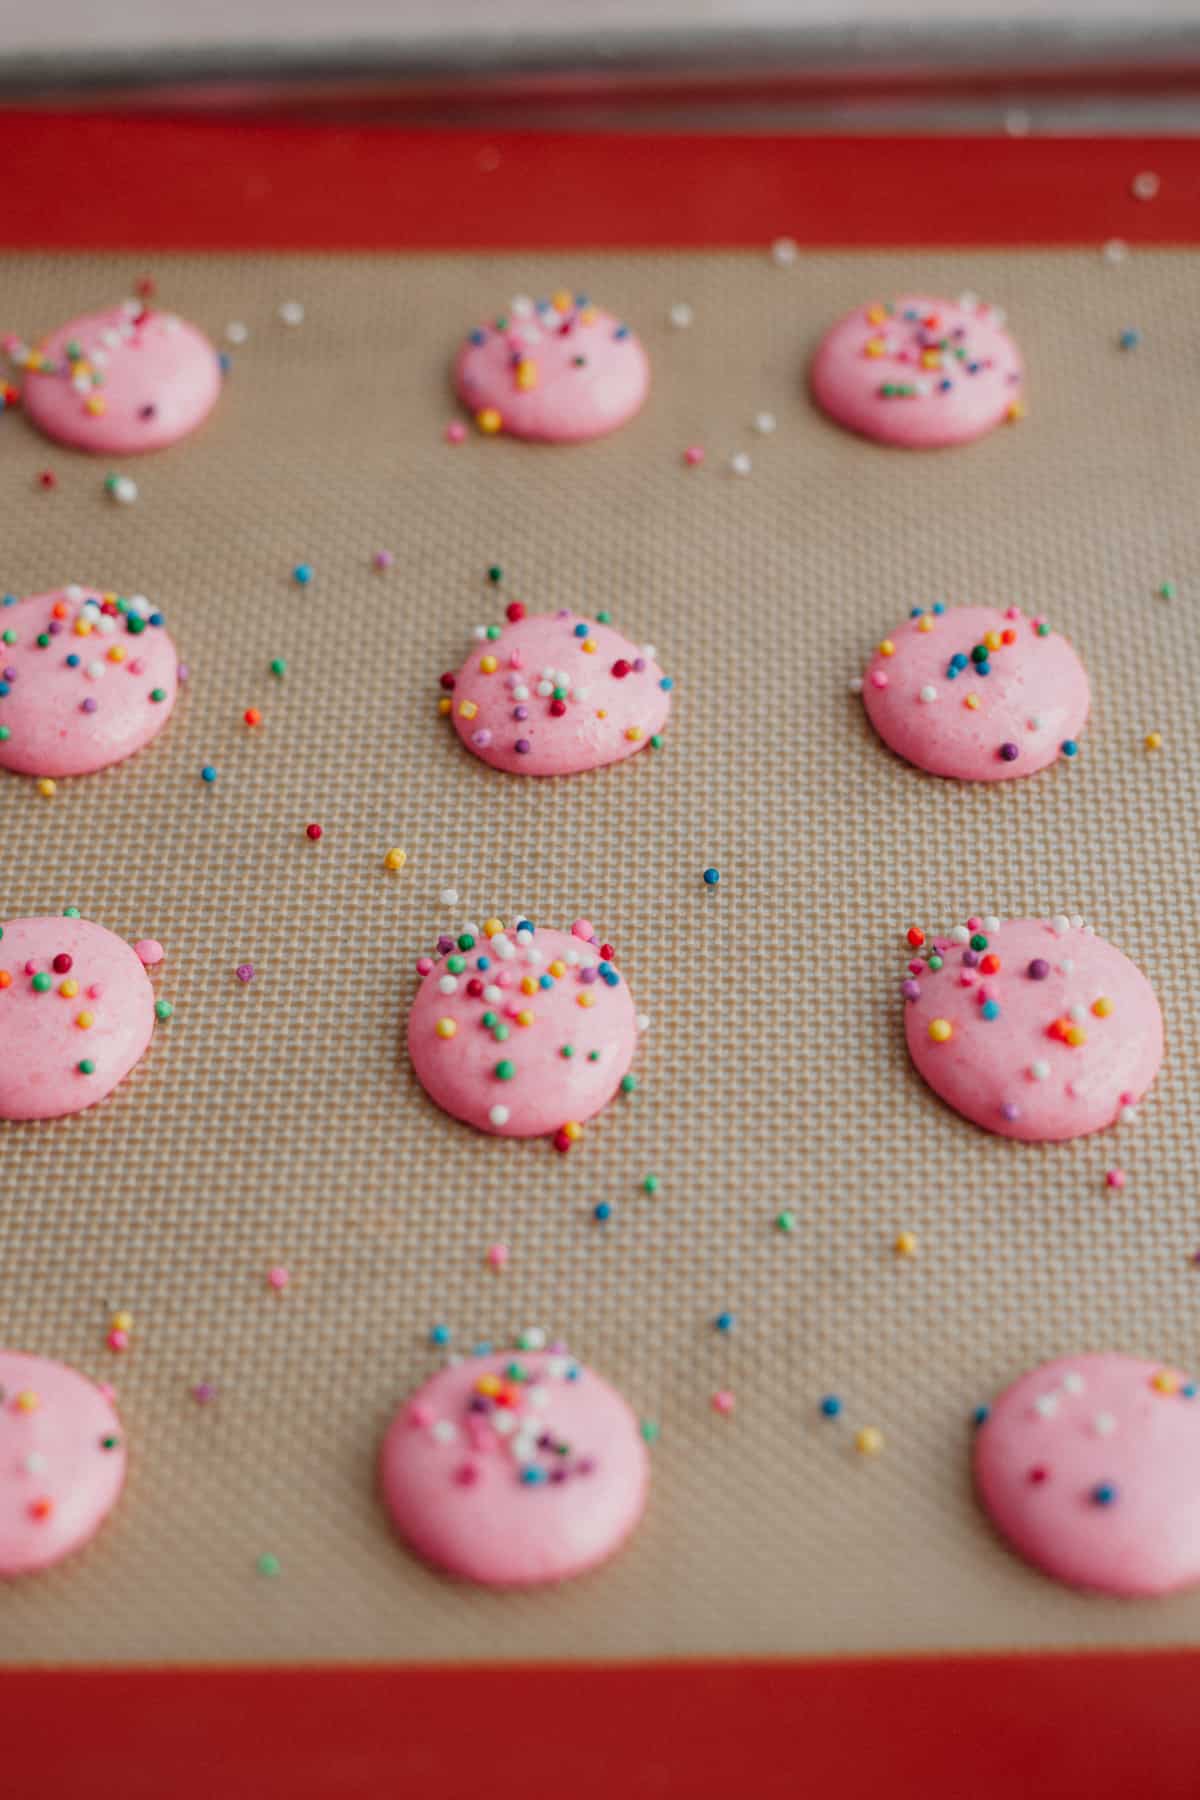 Pink macaron shells with sprinkles on top, unbaked